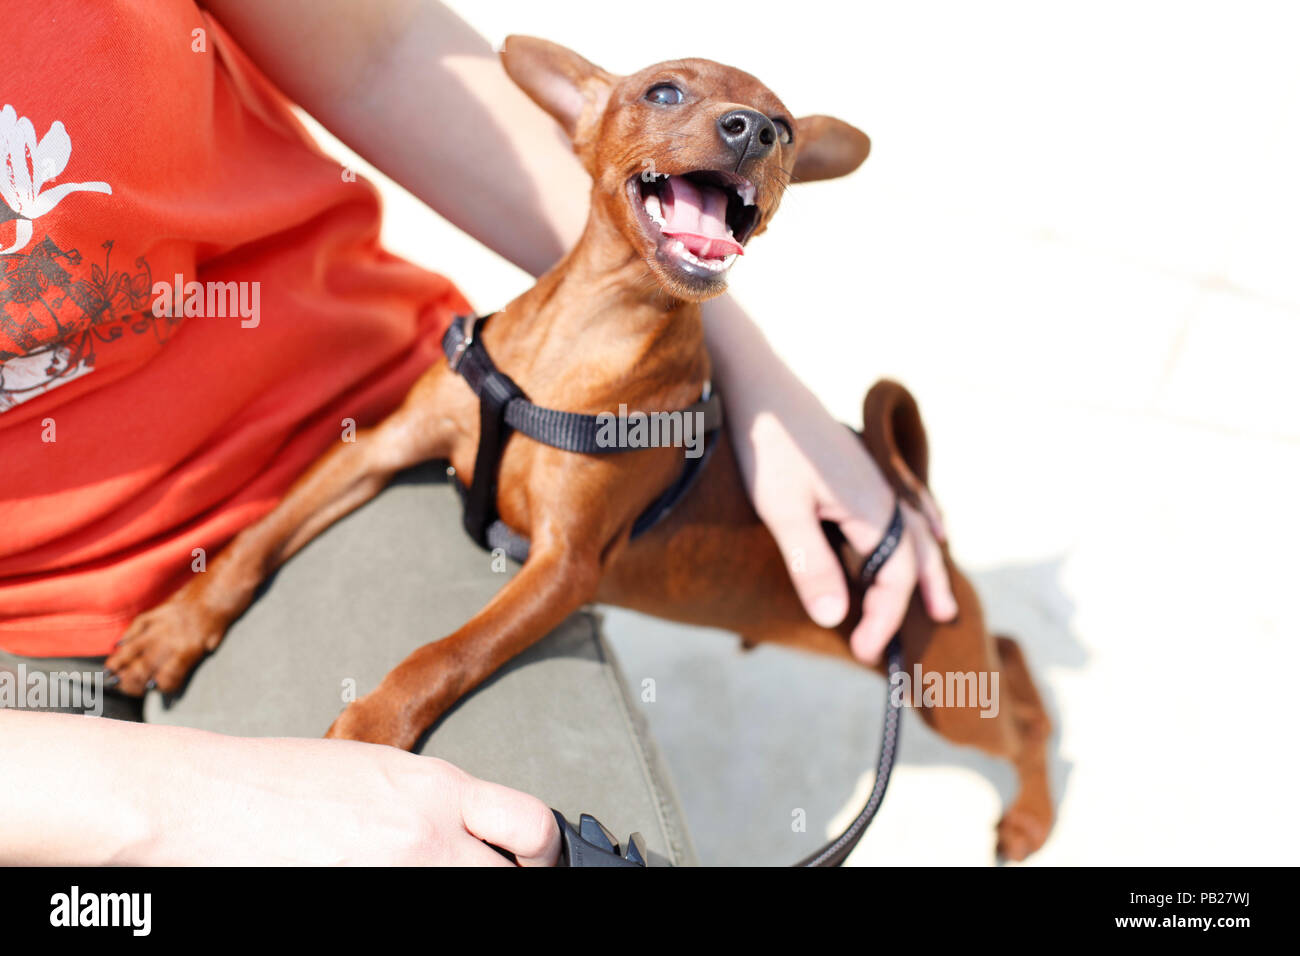 Stag red Miniature Pinscher Dog with uncropped ears wants to play Stock Photo